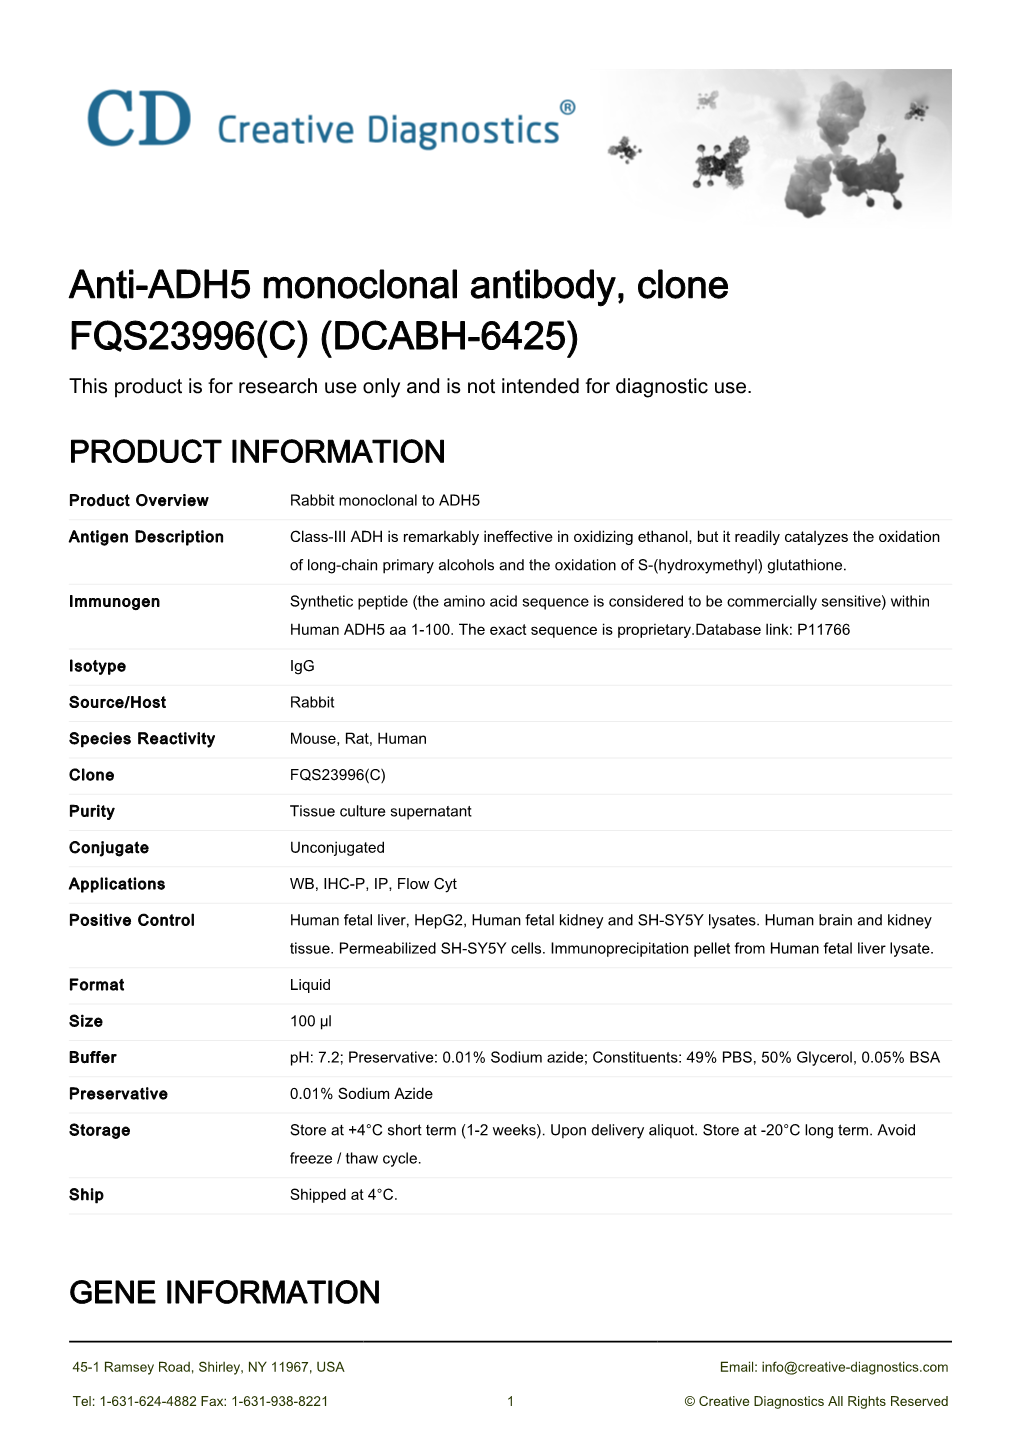 Anti-ADH5 Monoclonal Antibody, Clone FQS23996(C) (DCABH-6425) This Product Is for Research Use Only and Is Not Intended for Diagnostic Use